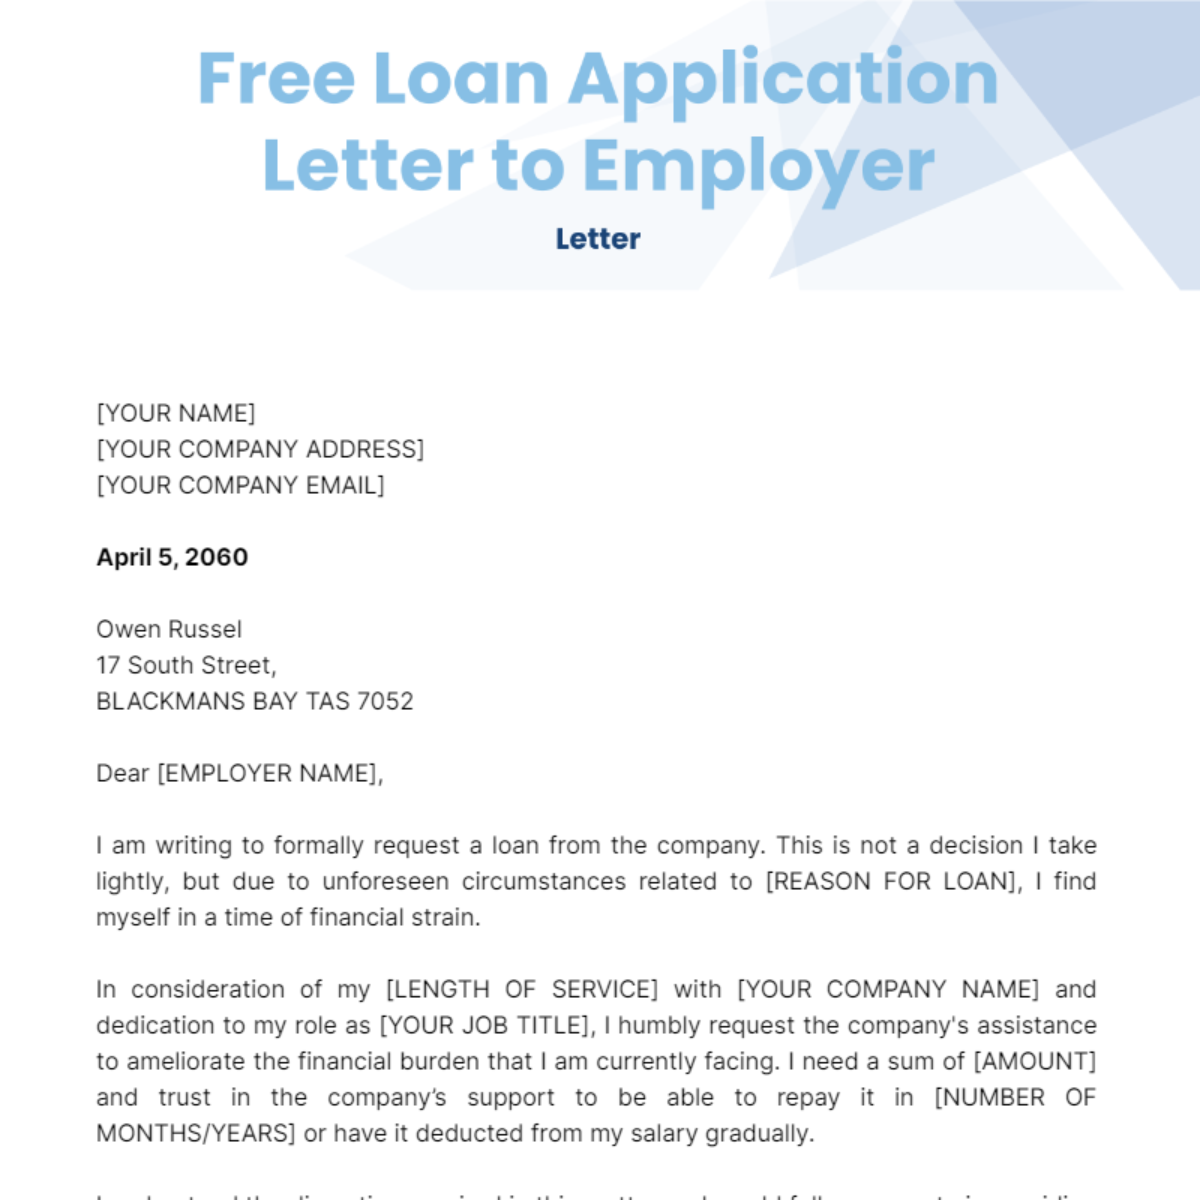 Loan Application Letter to Employer Template